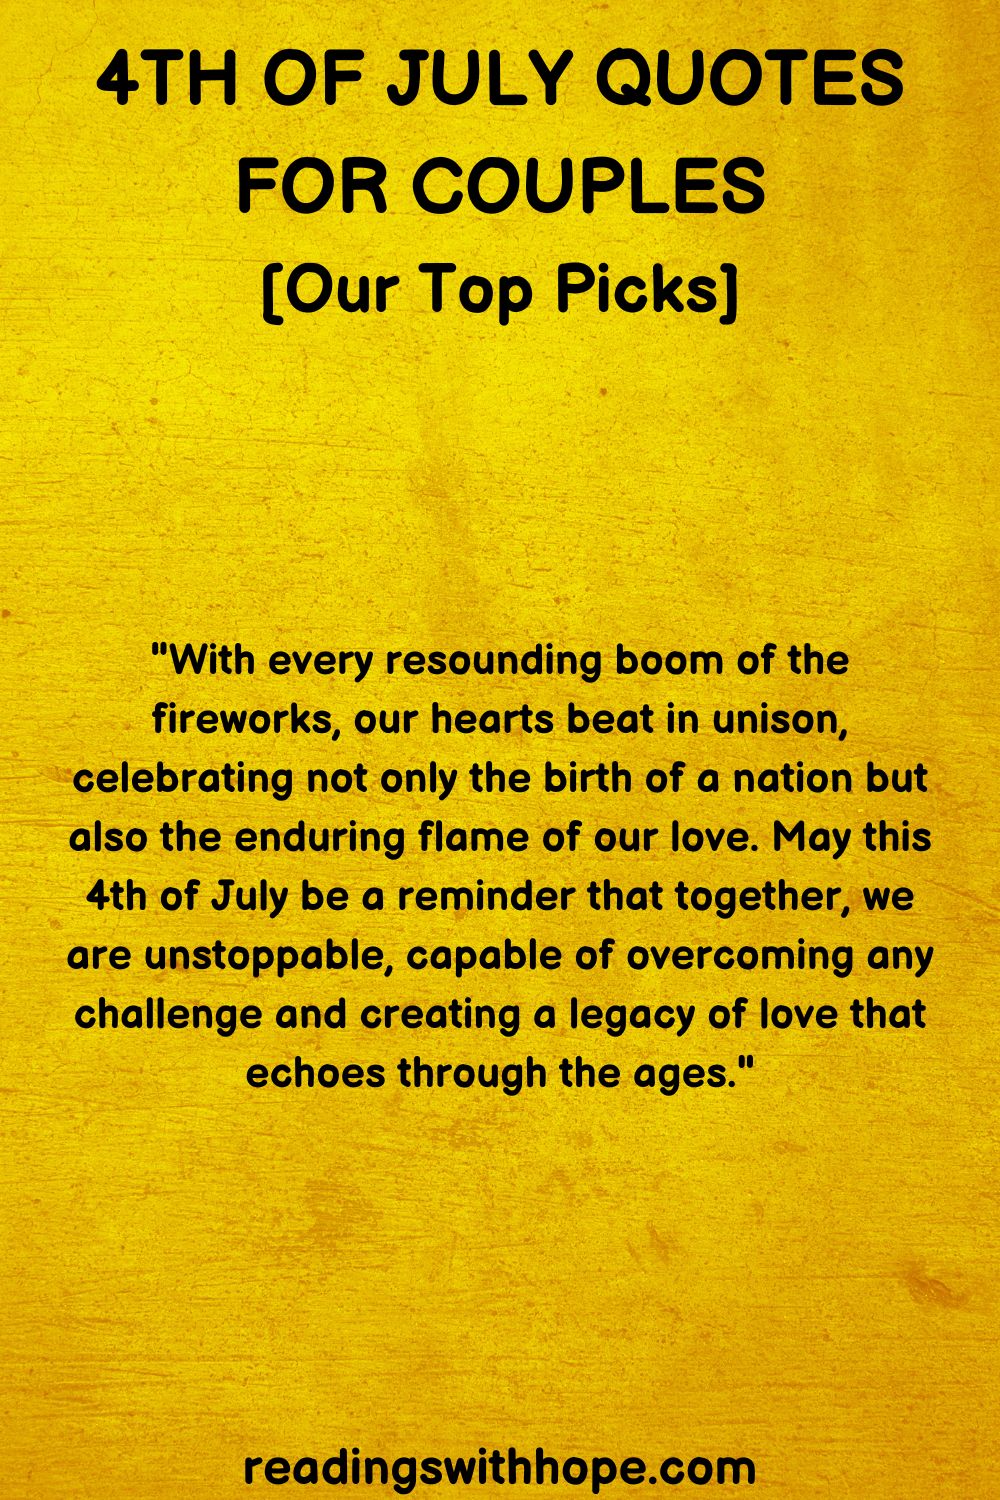 4th of July Quotes For Couples